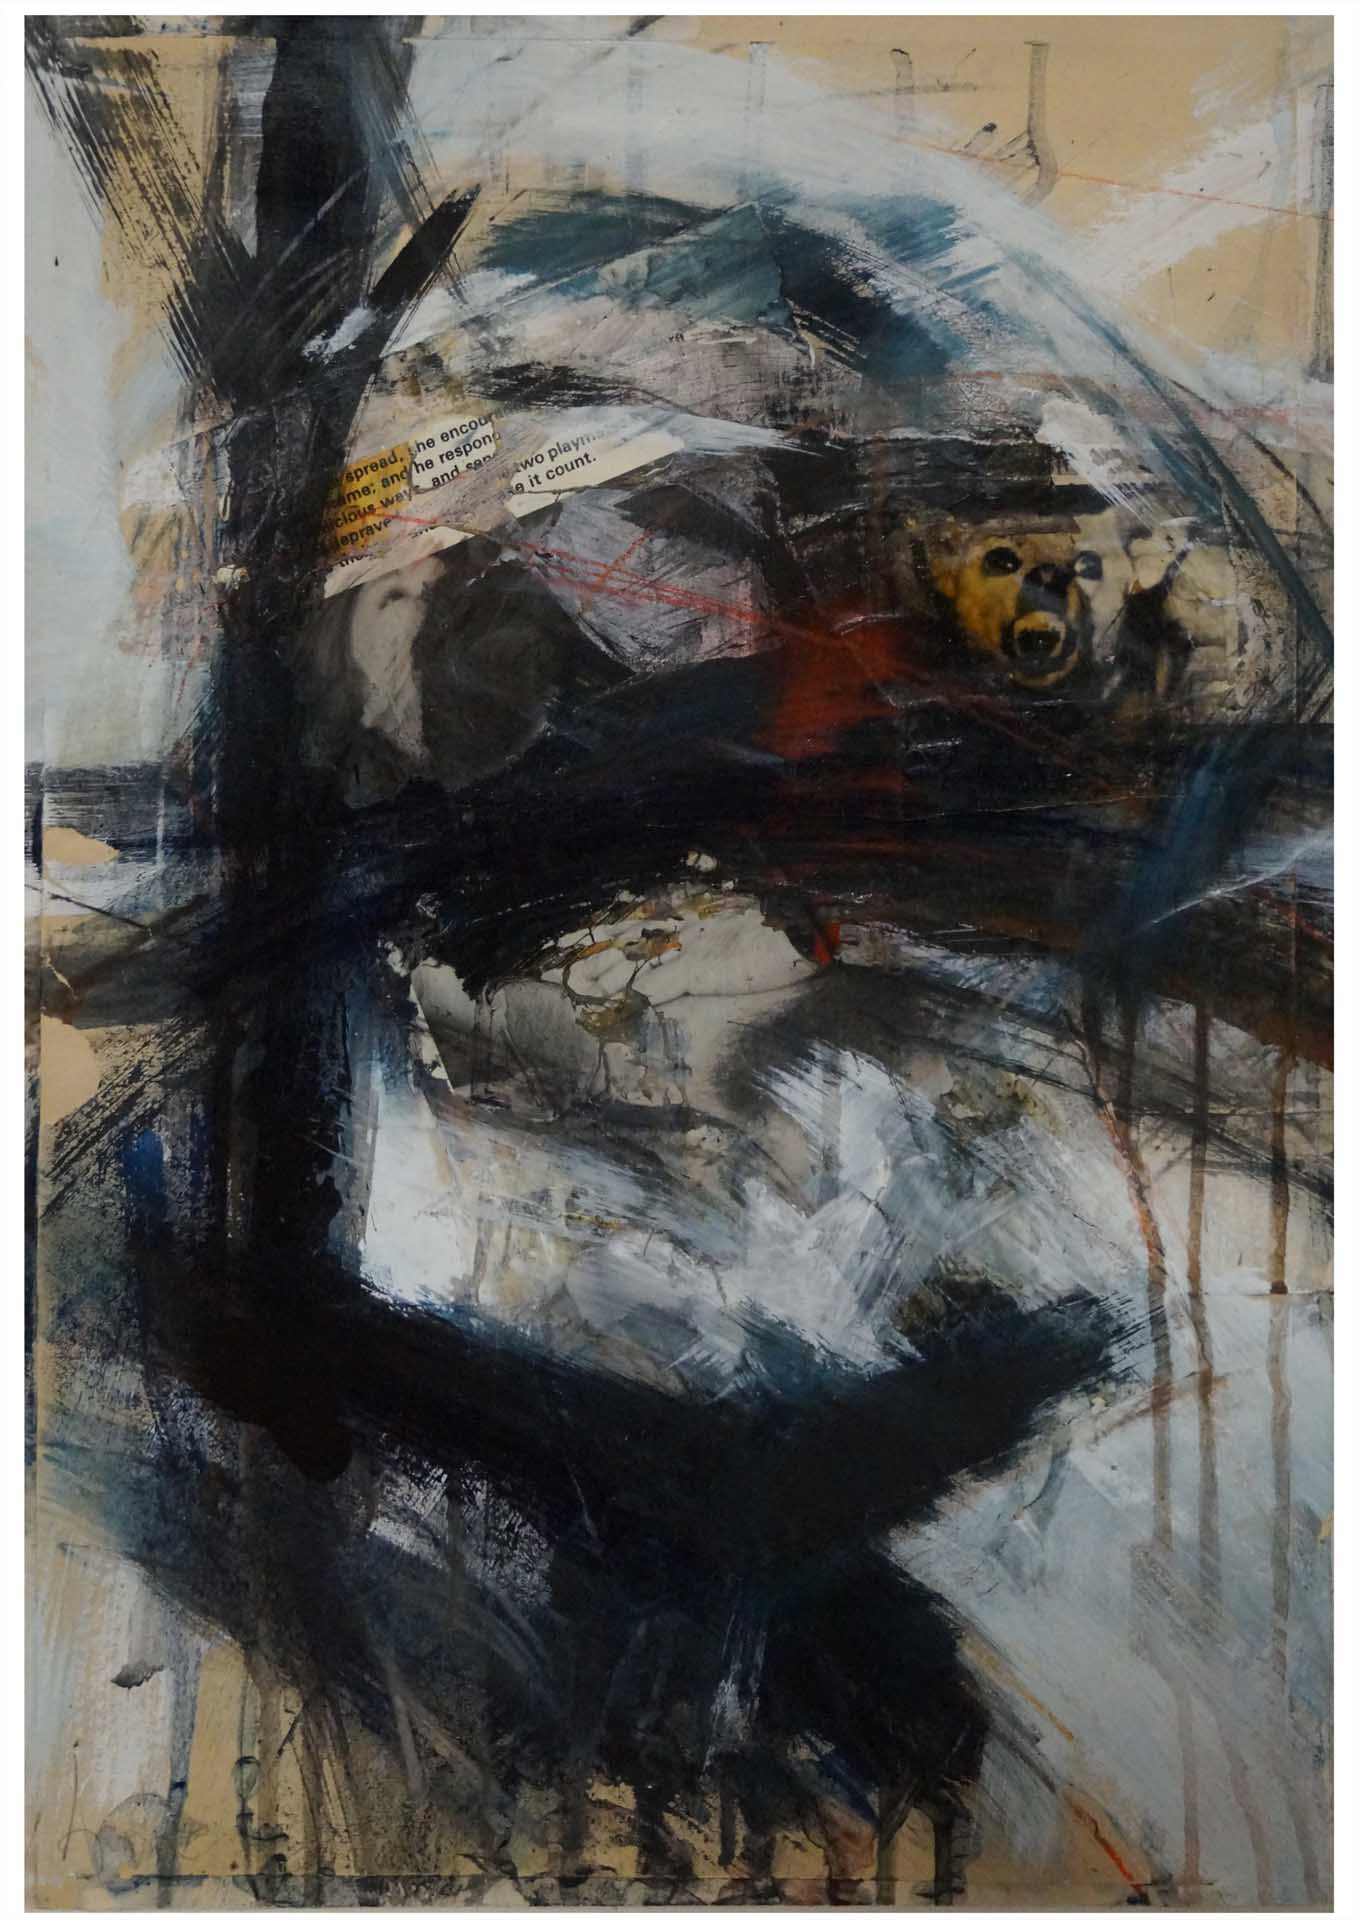 André Werner, untitled (hound), mixed media, painted photograph on paper, ca. 1988, 42 x 29,7 cm, 16,5 x 11,6 inch